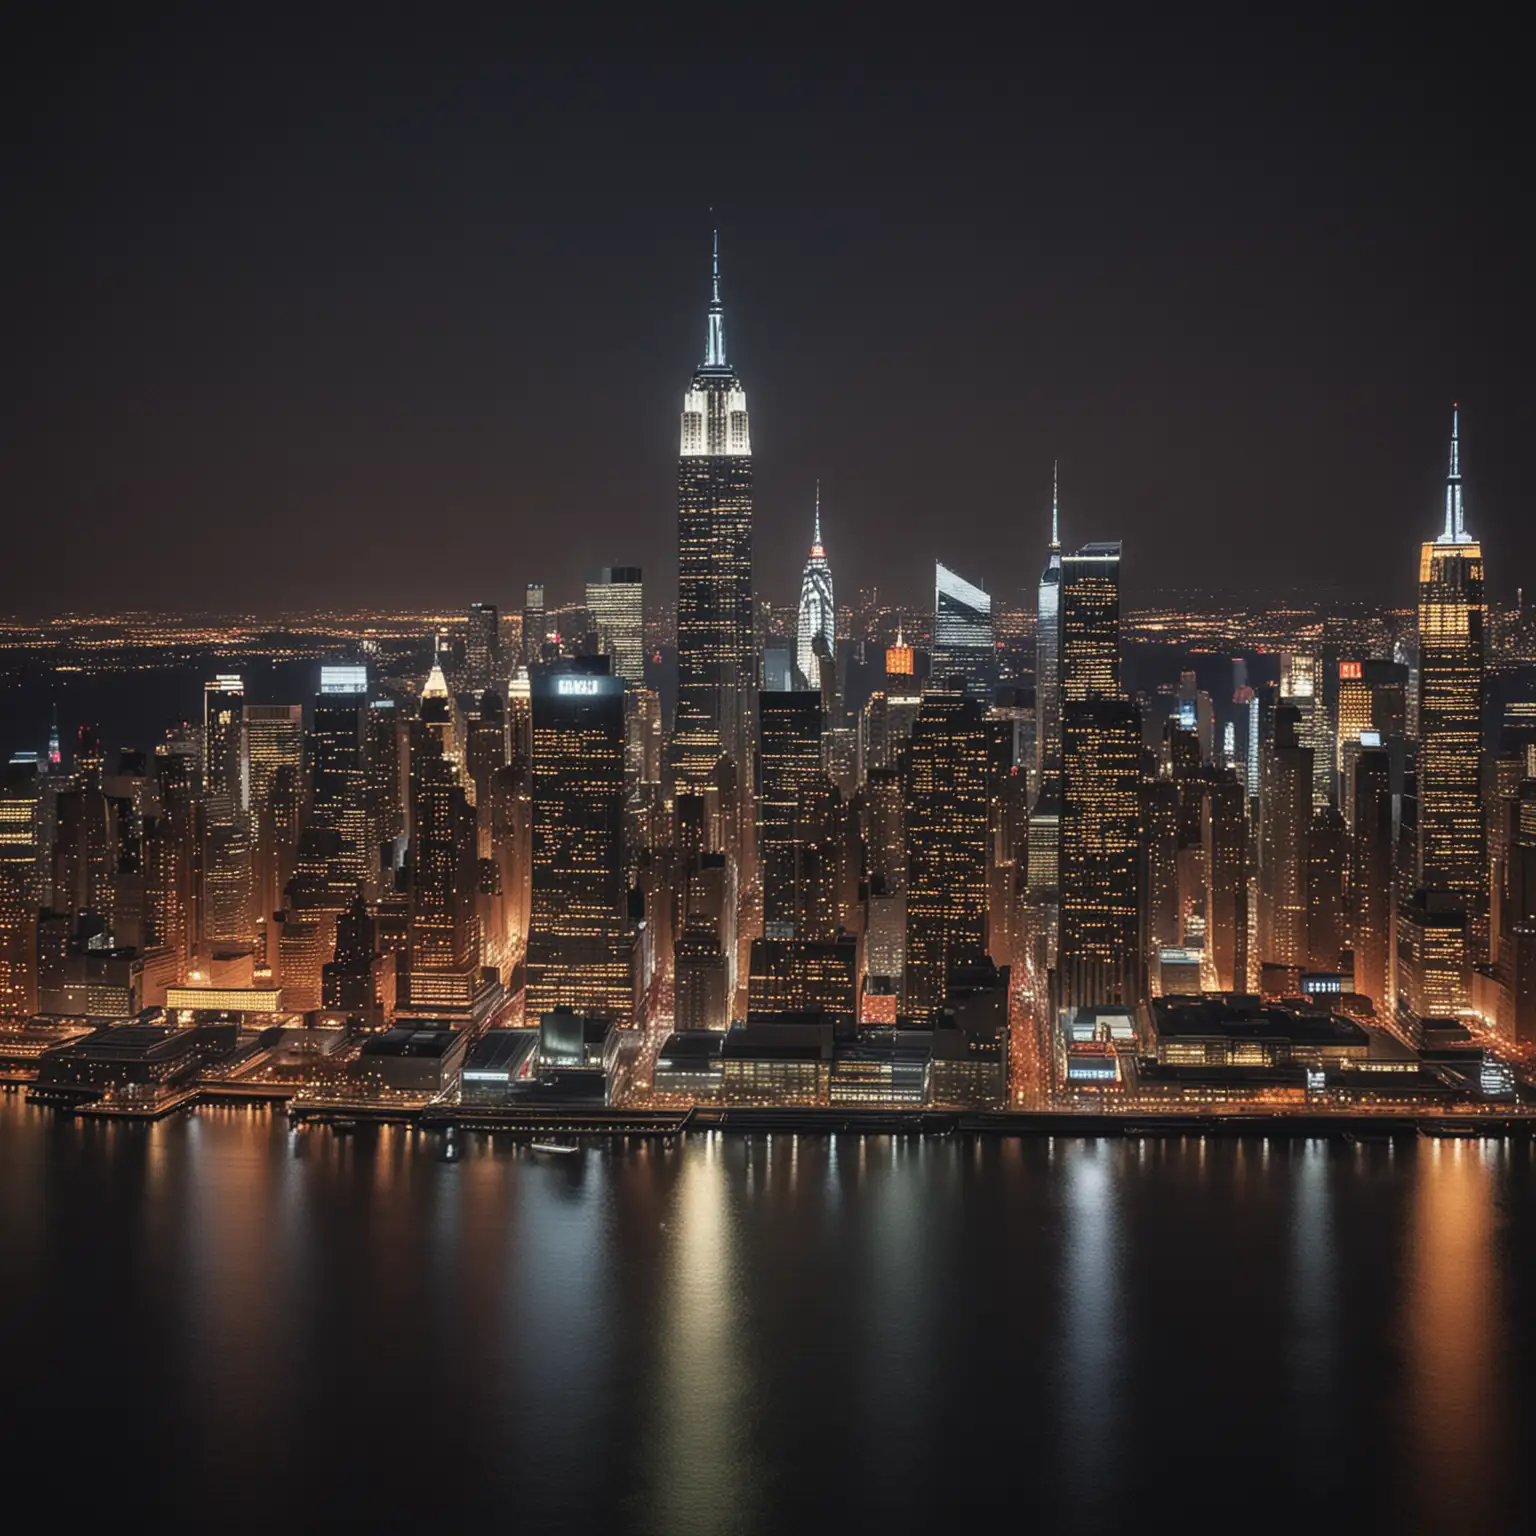 Captivating Night View of New York Citys Iconic Skyscrapers and Landmarks